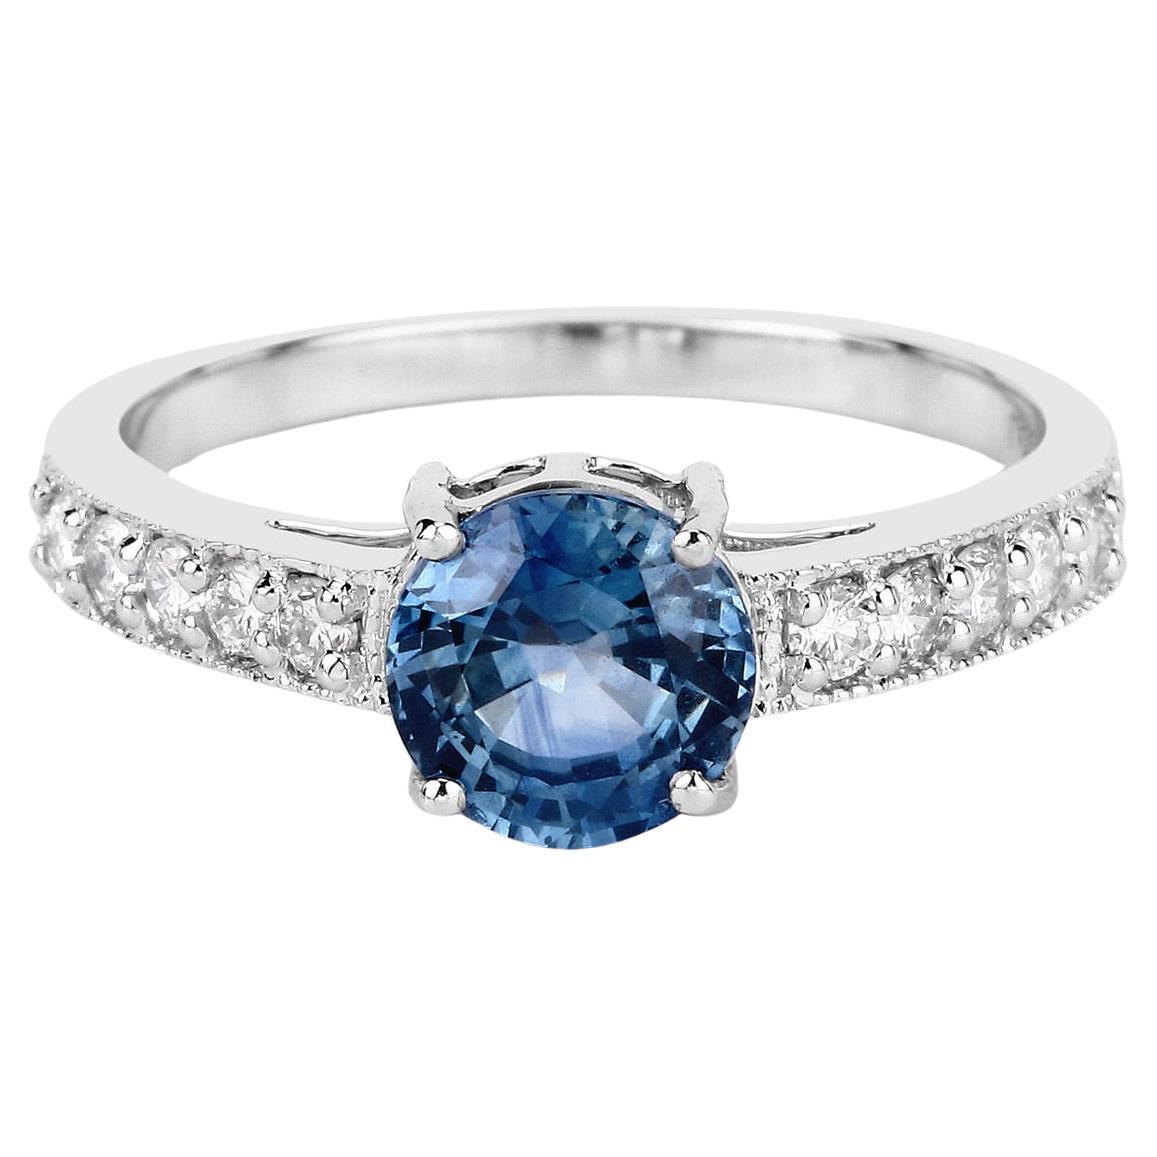 Blue Sapphire Ring With Diamonds 1.90 Carats 14K White Gold